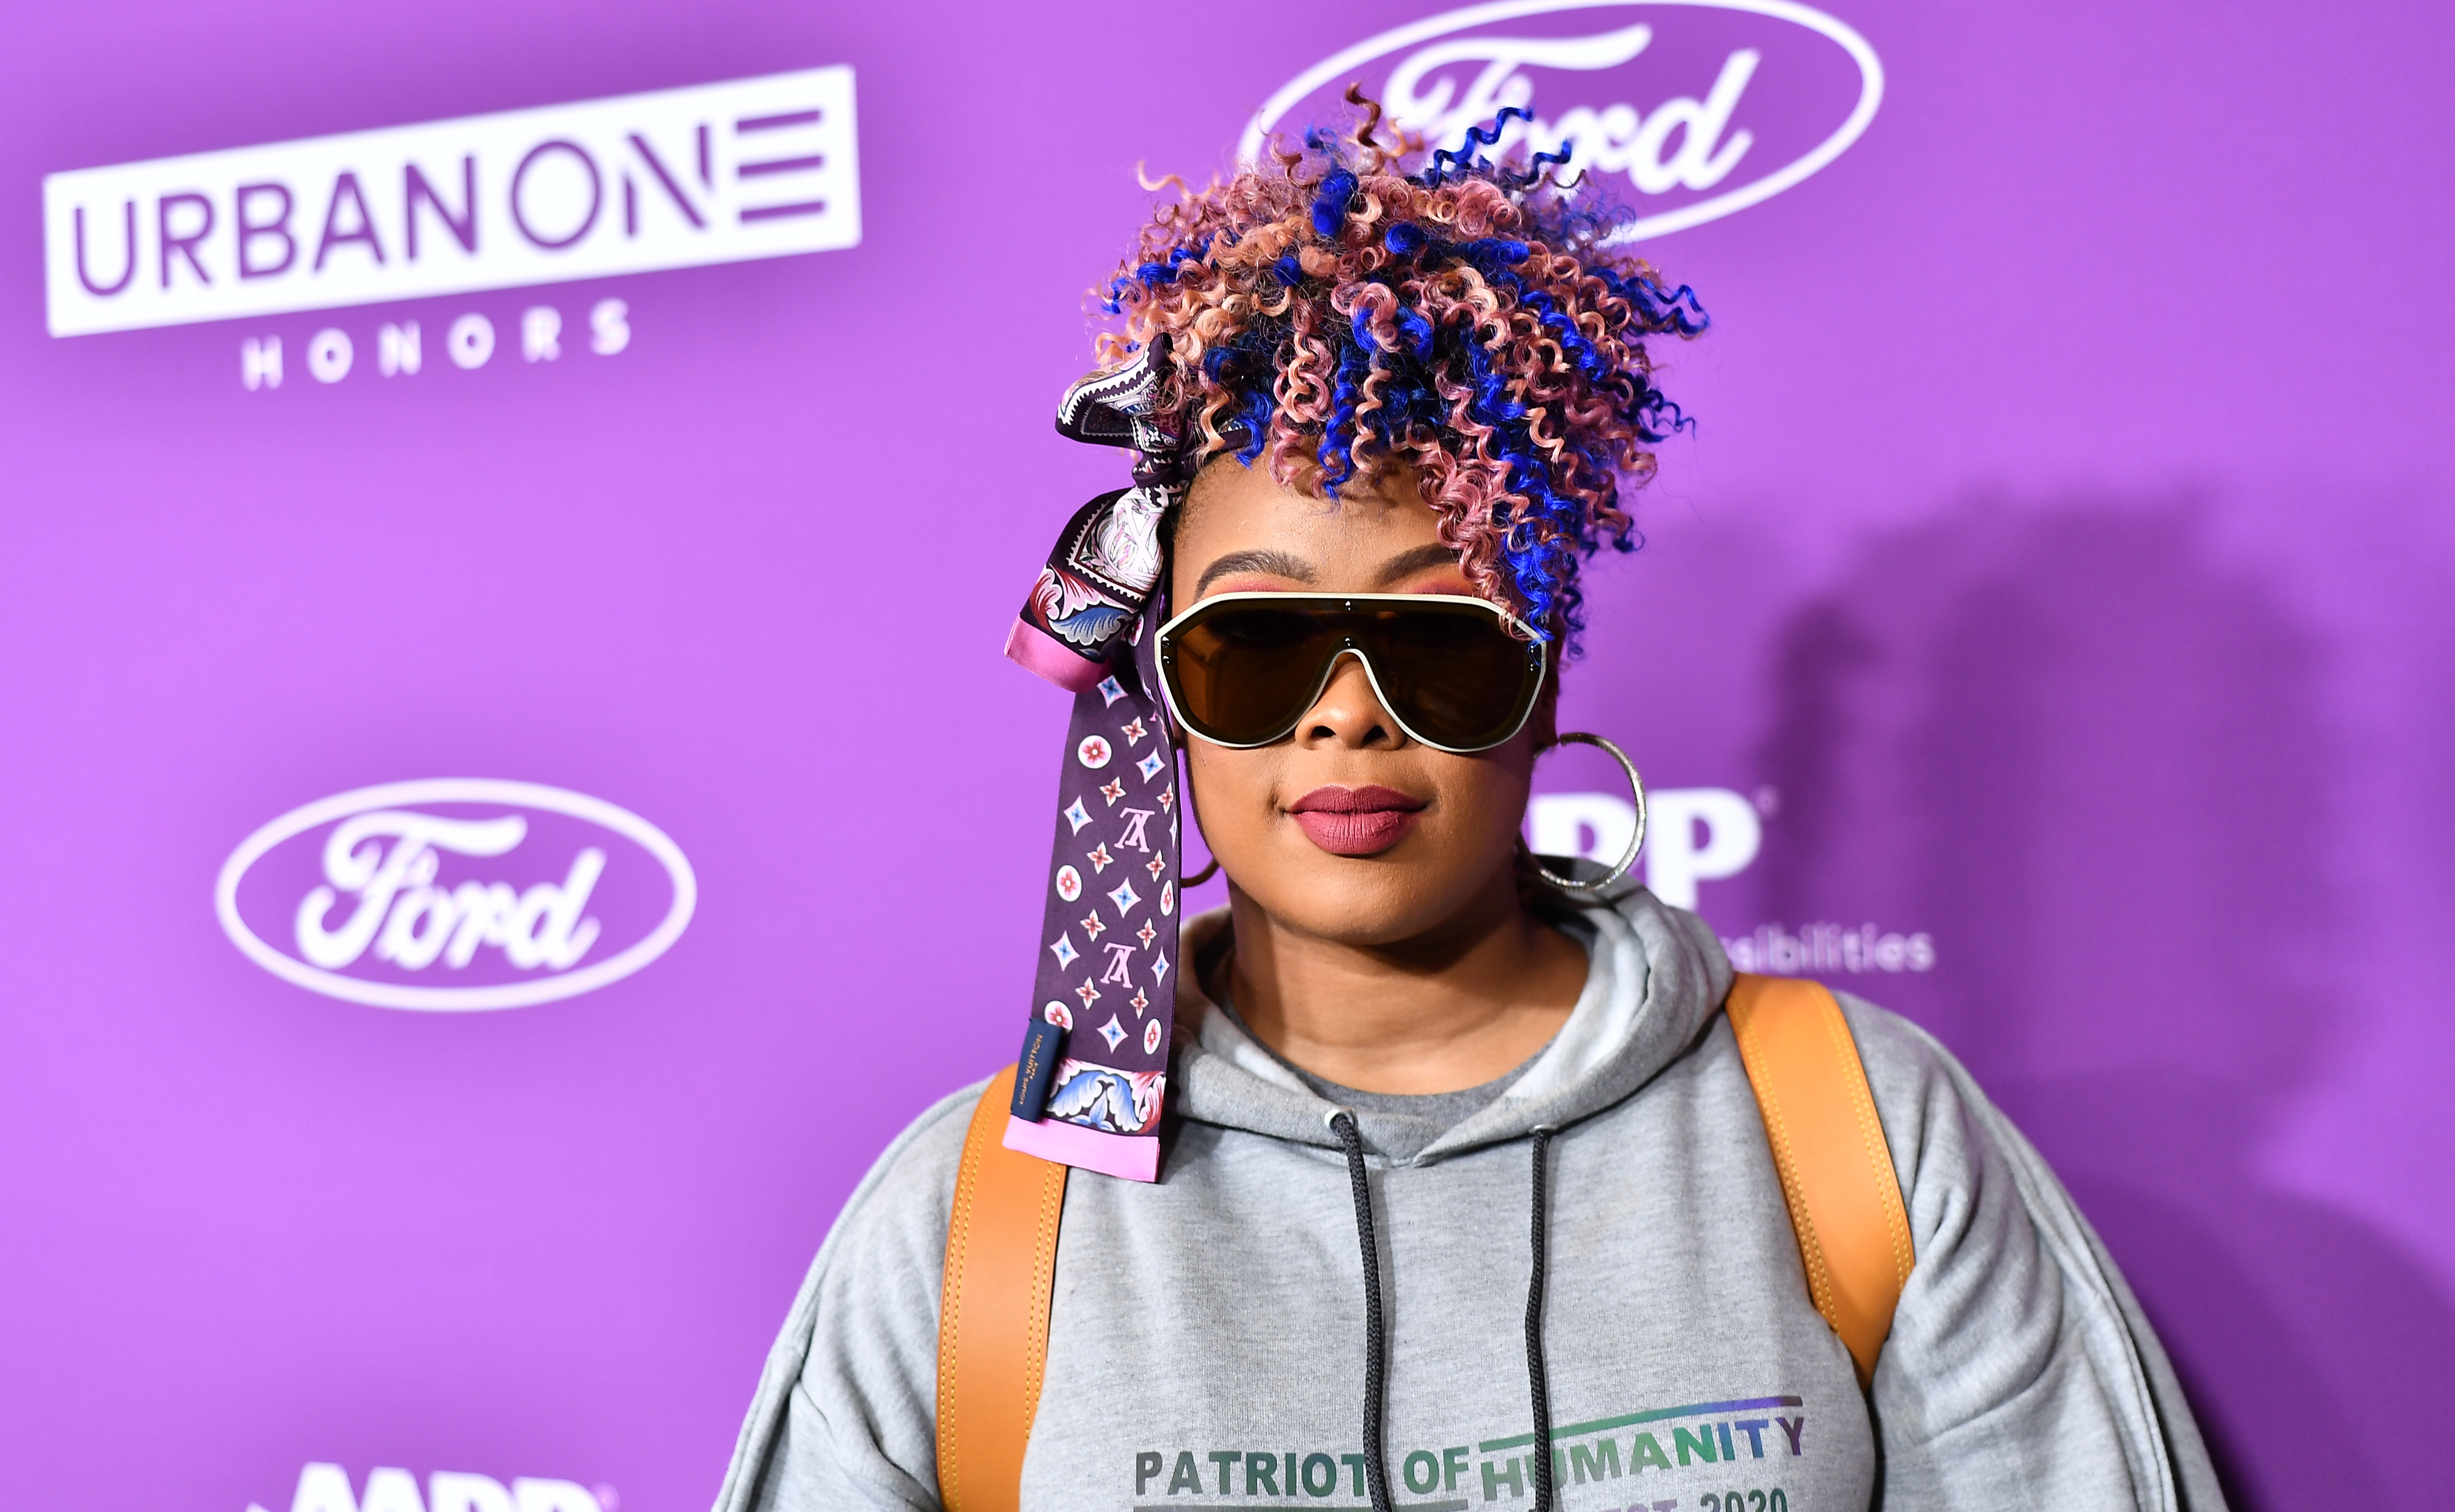 Da Brat at an event wearing a hooded outfit with ribboned braids and sunglasses